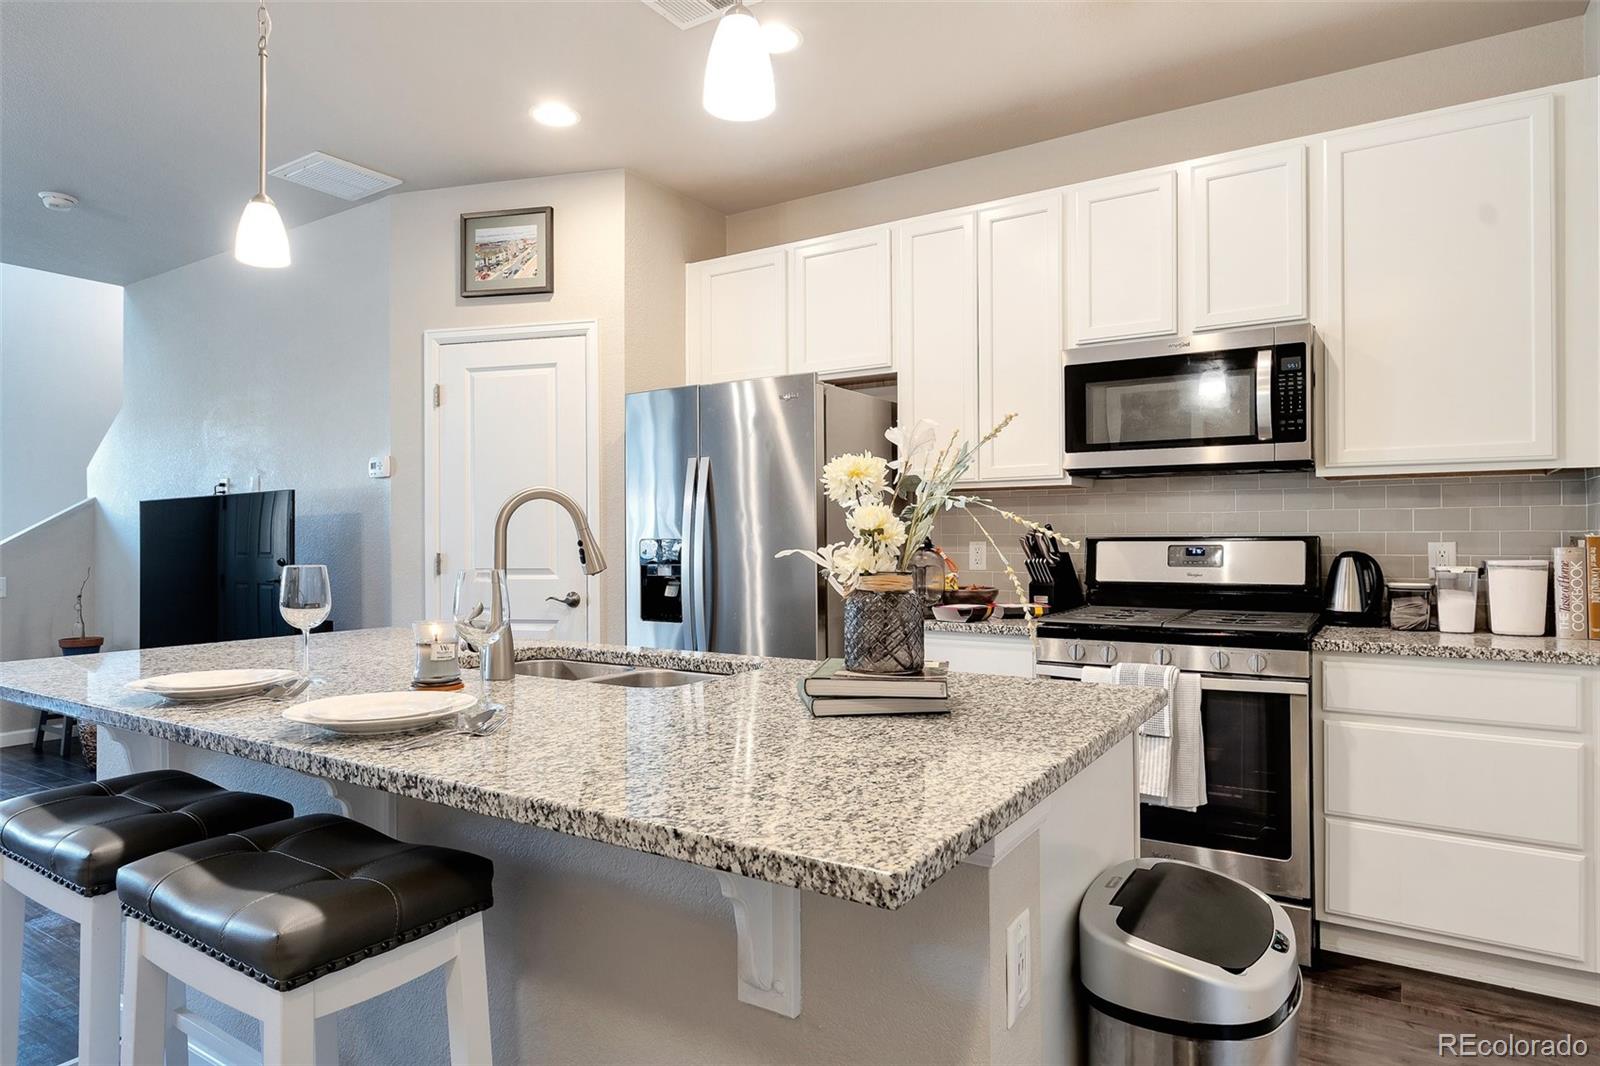 a kitchen with granite countertop kitchen island stainless steel appliances a stove microwave and sink